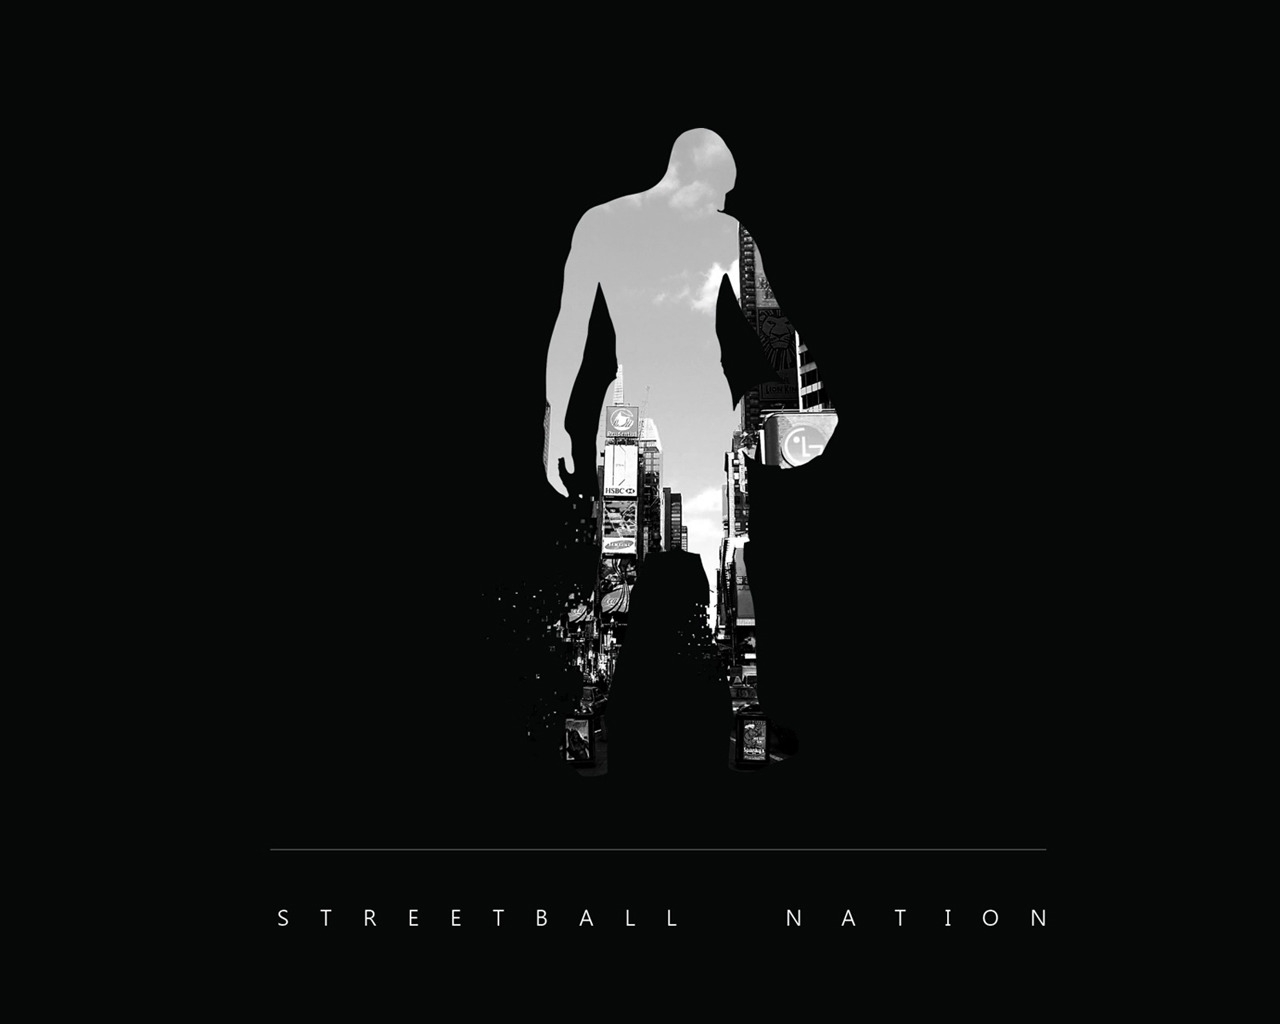 Streetball Nation for 1280 x 1024 resolution